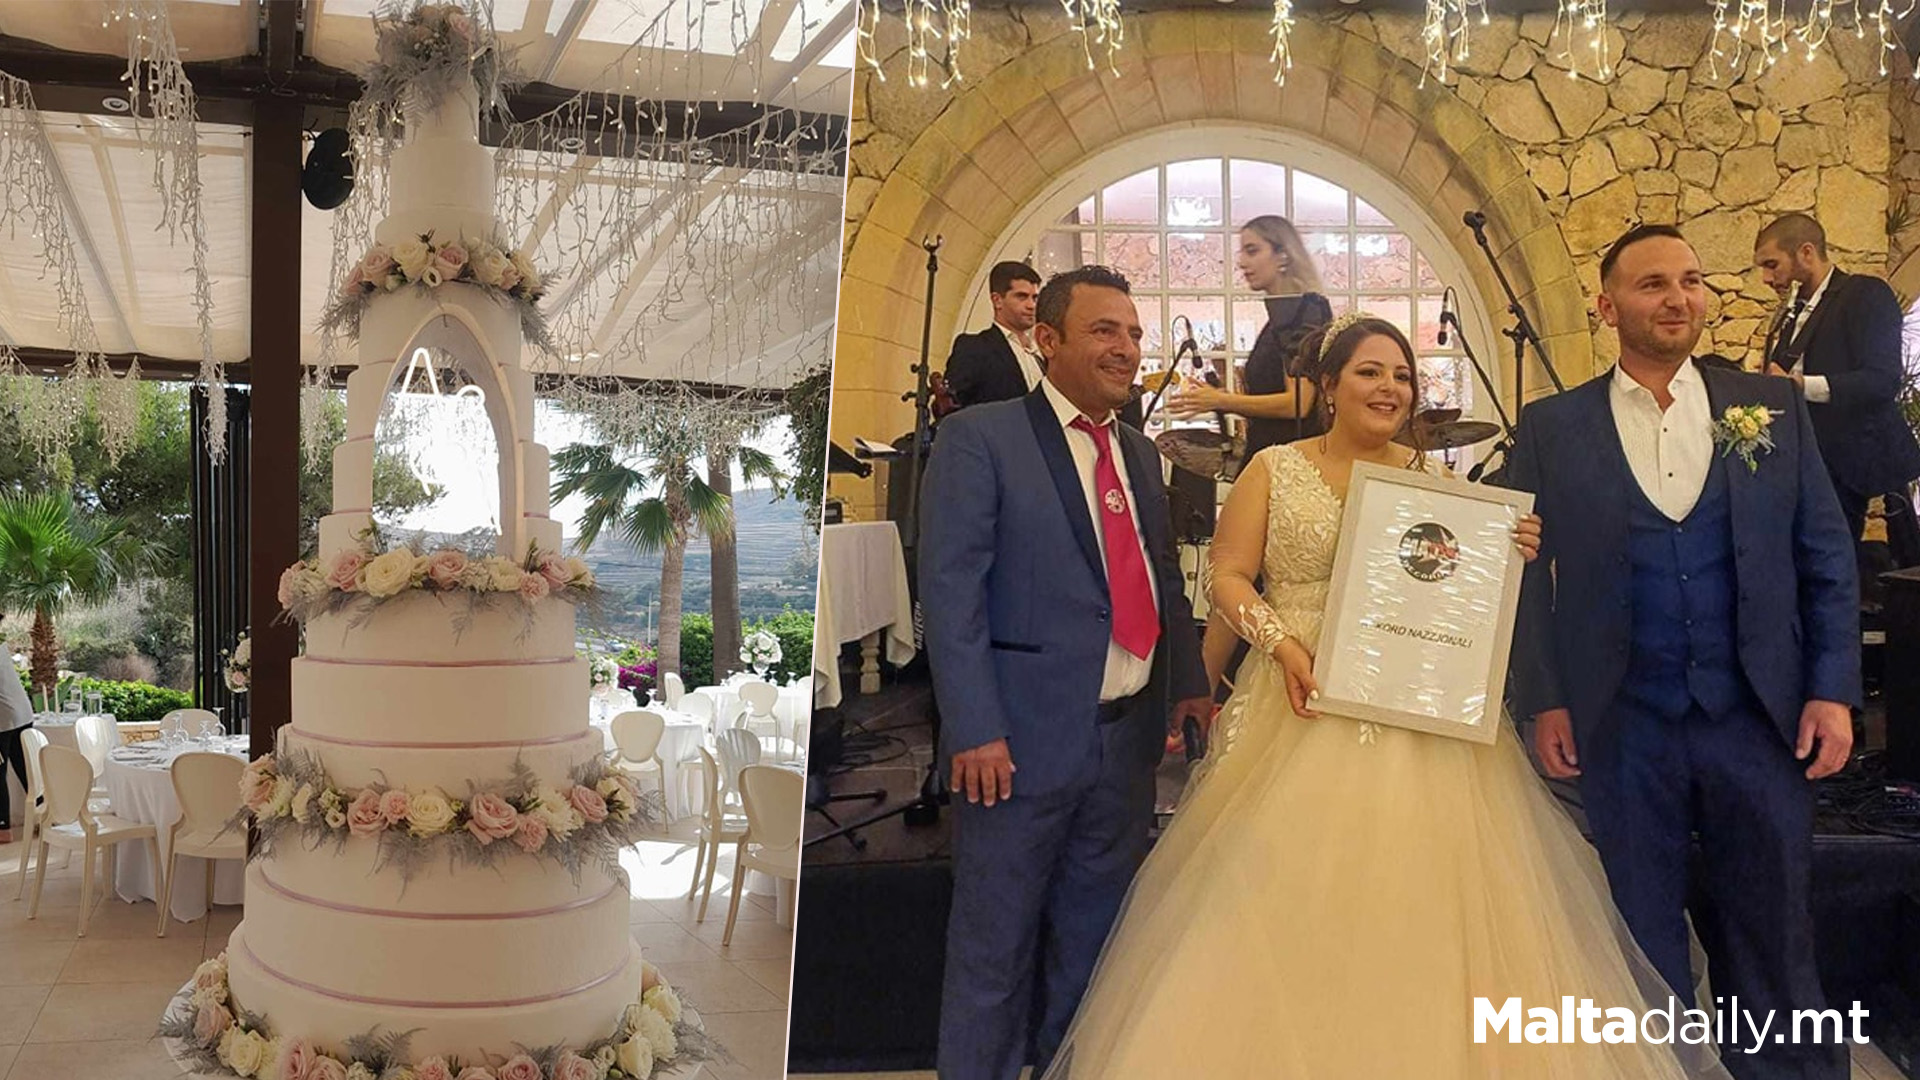 Newly Married Maltese Couple Break Largest Cake Record